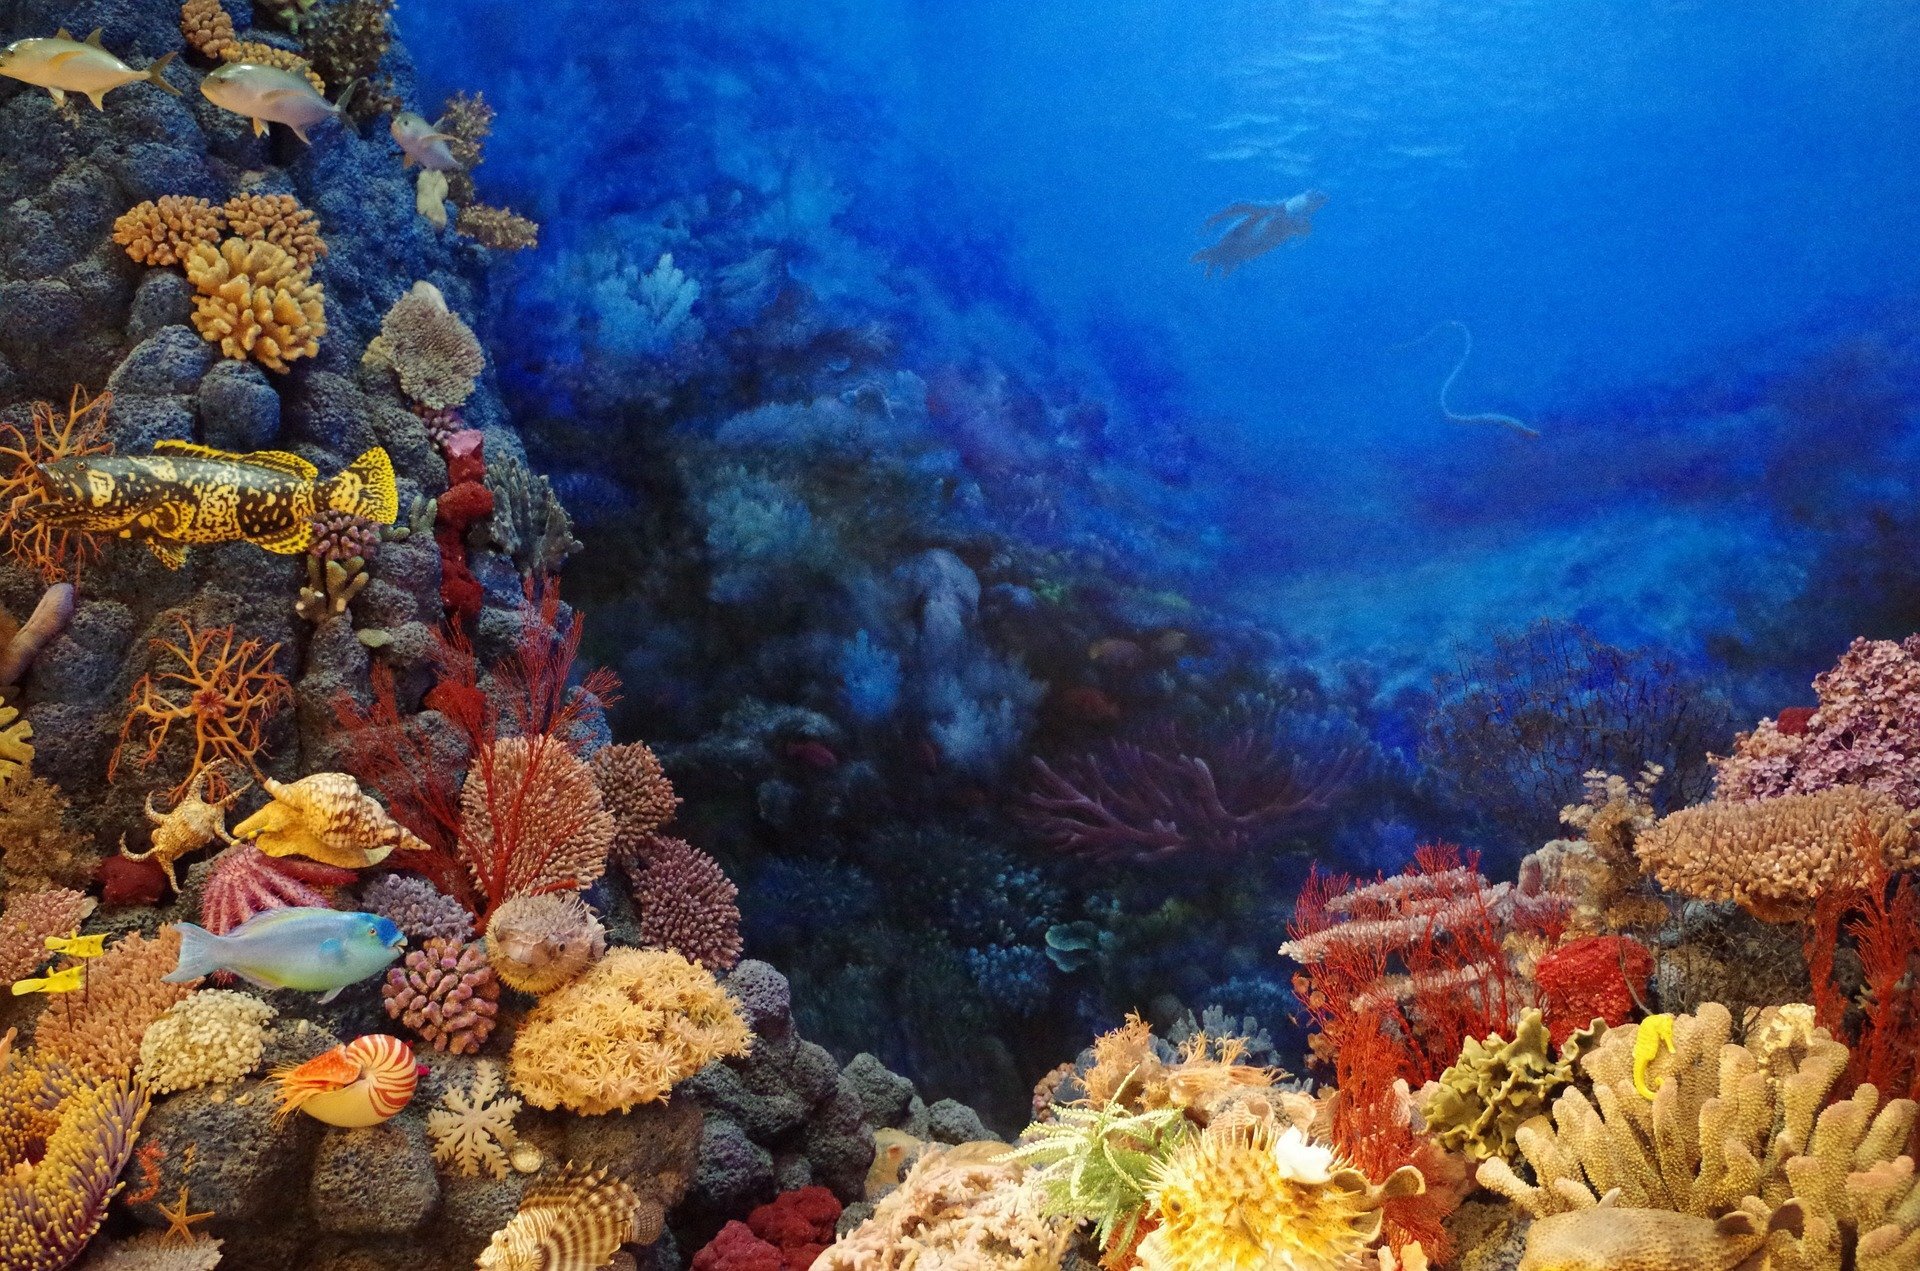 Nitrogen contained in coral provides evidence of human impact on